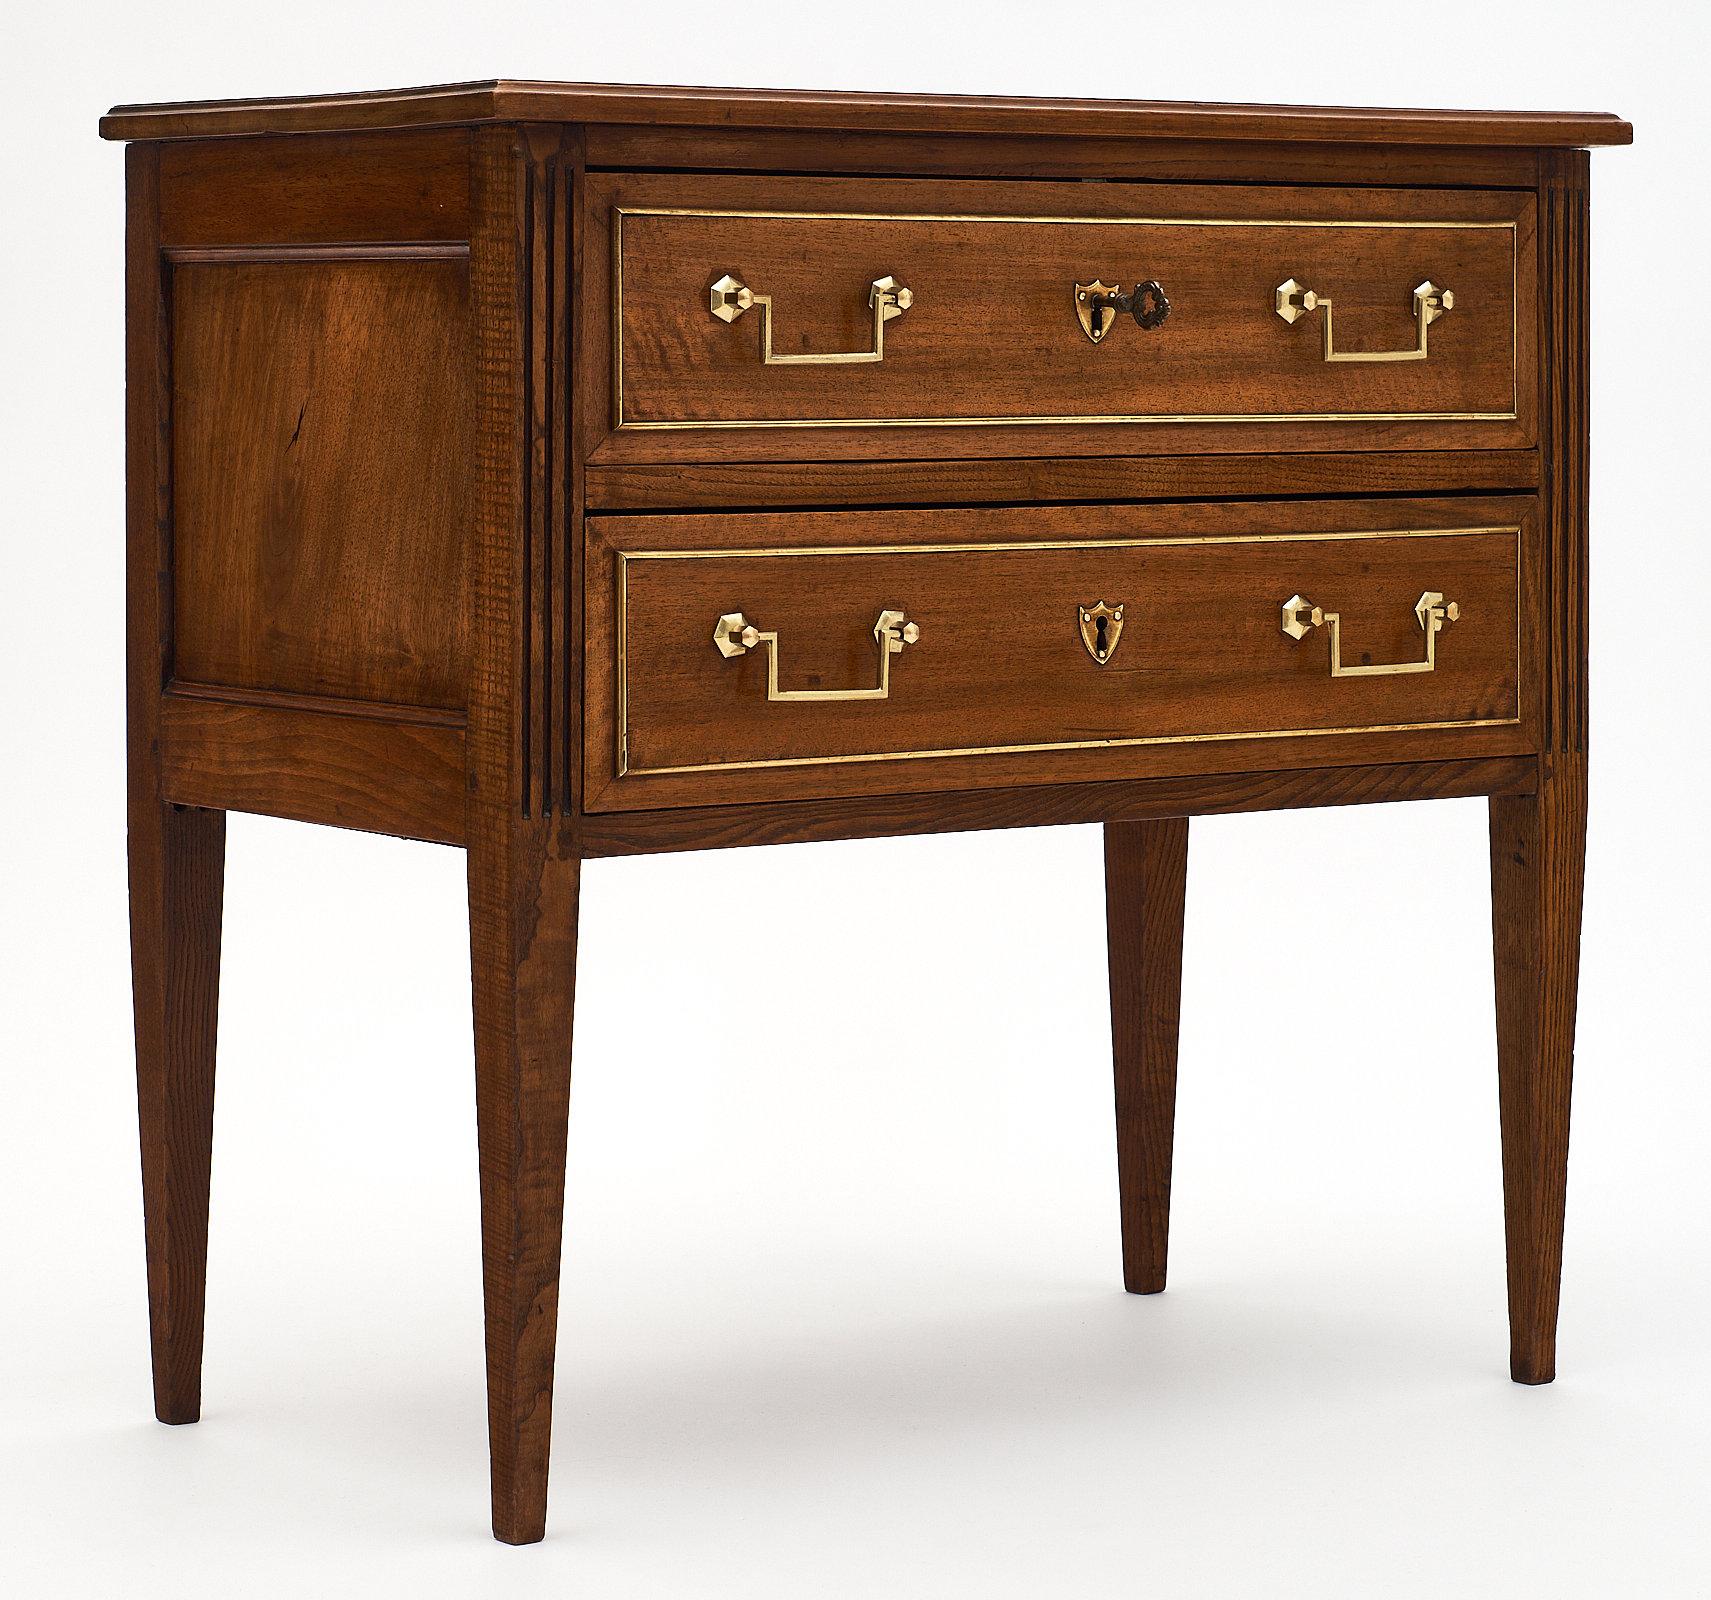 Antique walnut chest of drawers from France. This beautiful piece features two dovetailed drawers with brass hardware and trim. The tapered legs add an elegant touch to this piece, perfect as a night stand or in a bedroom.